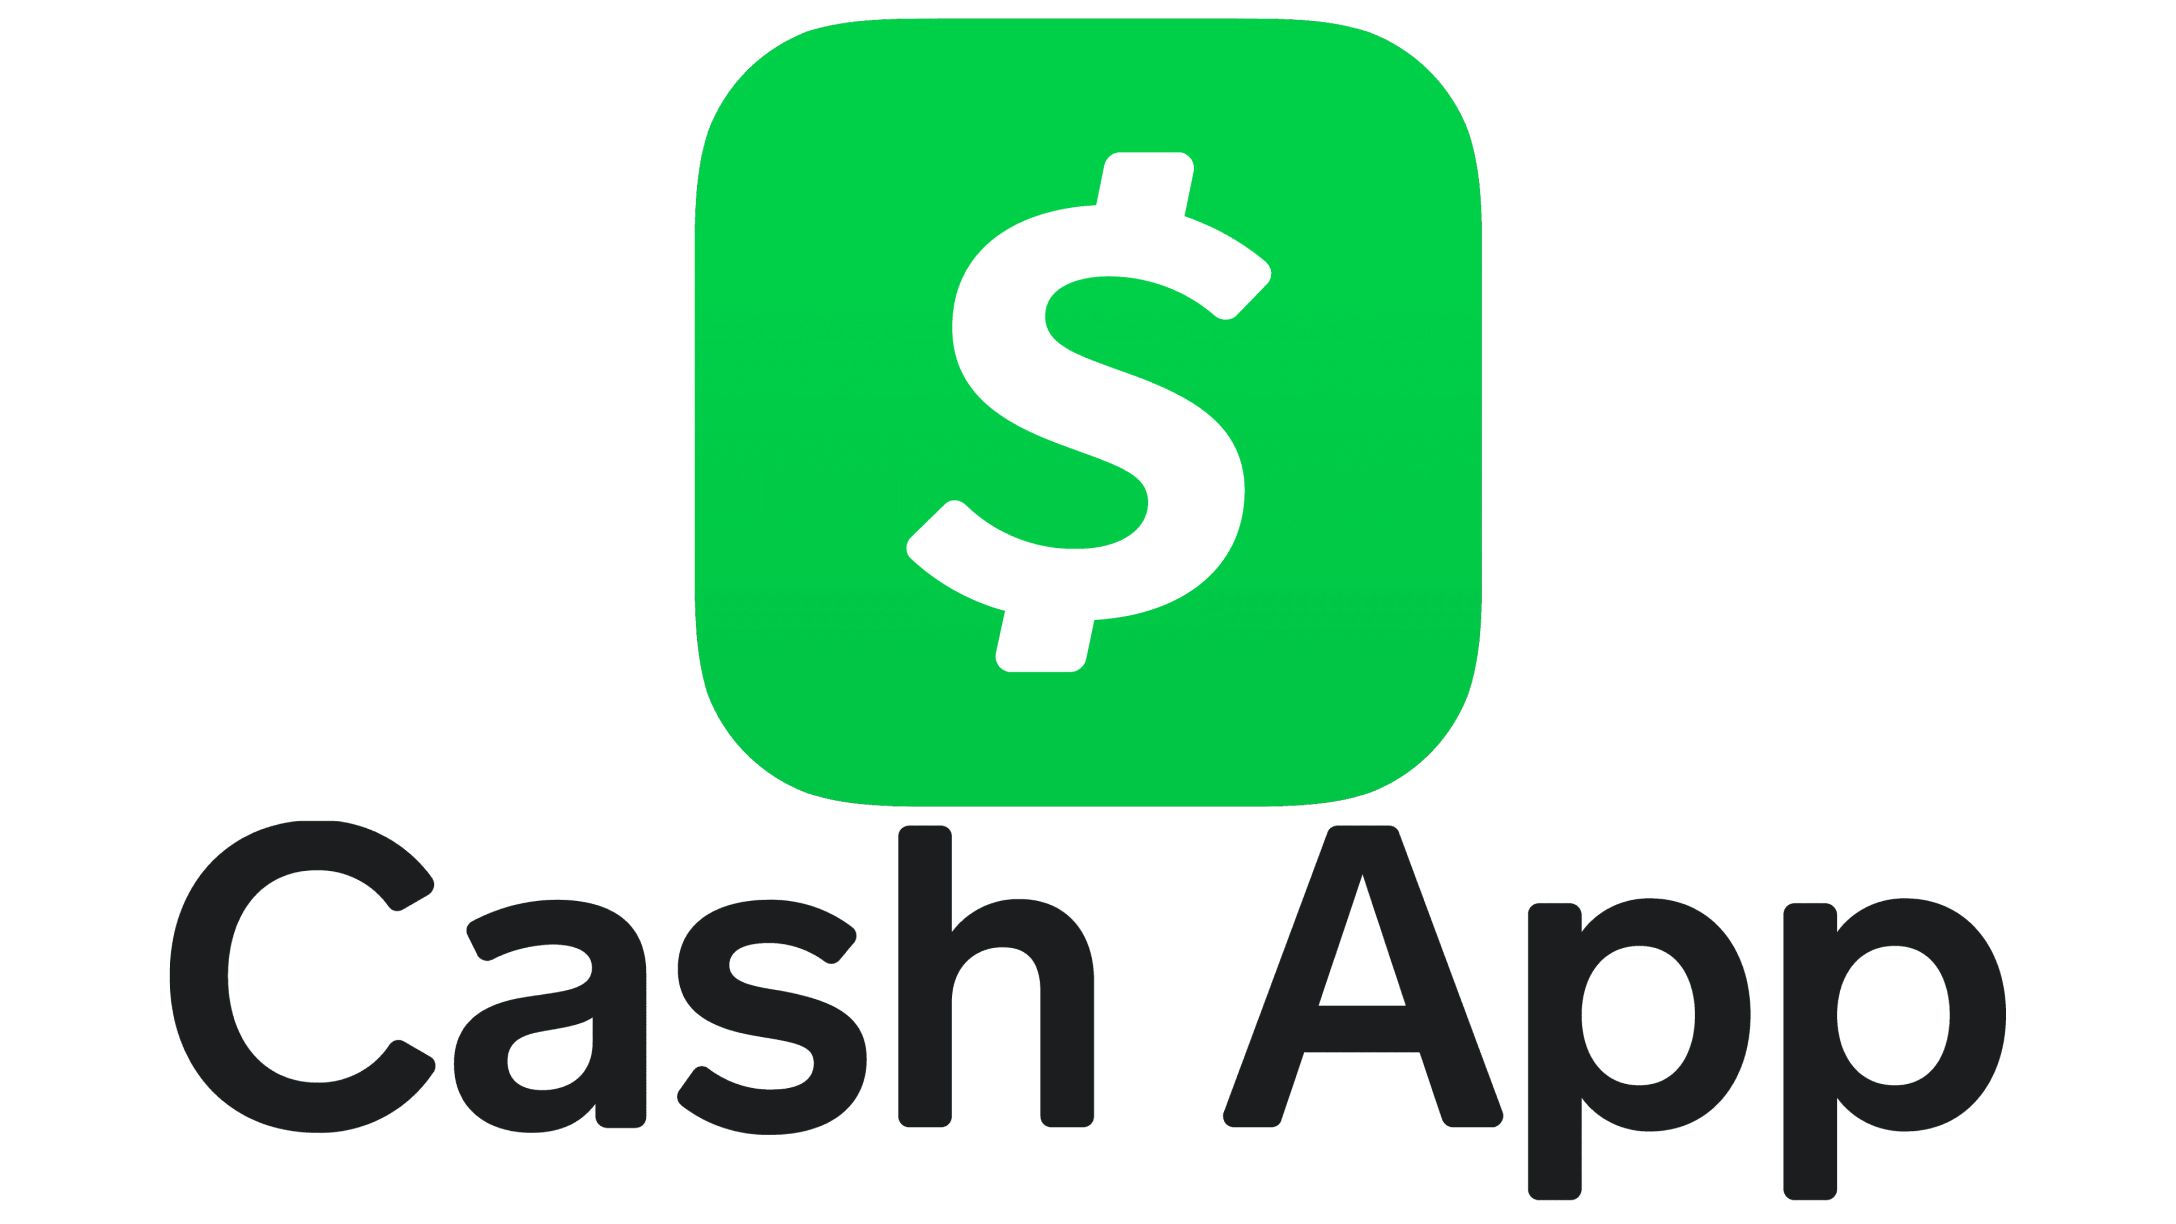 Is The Cash App A Checking Or Savings Account?